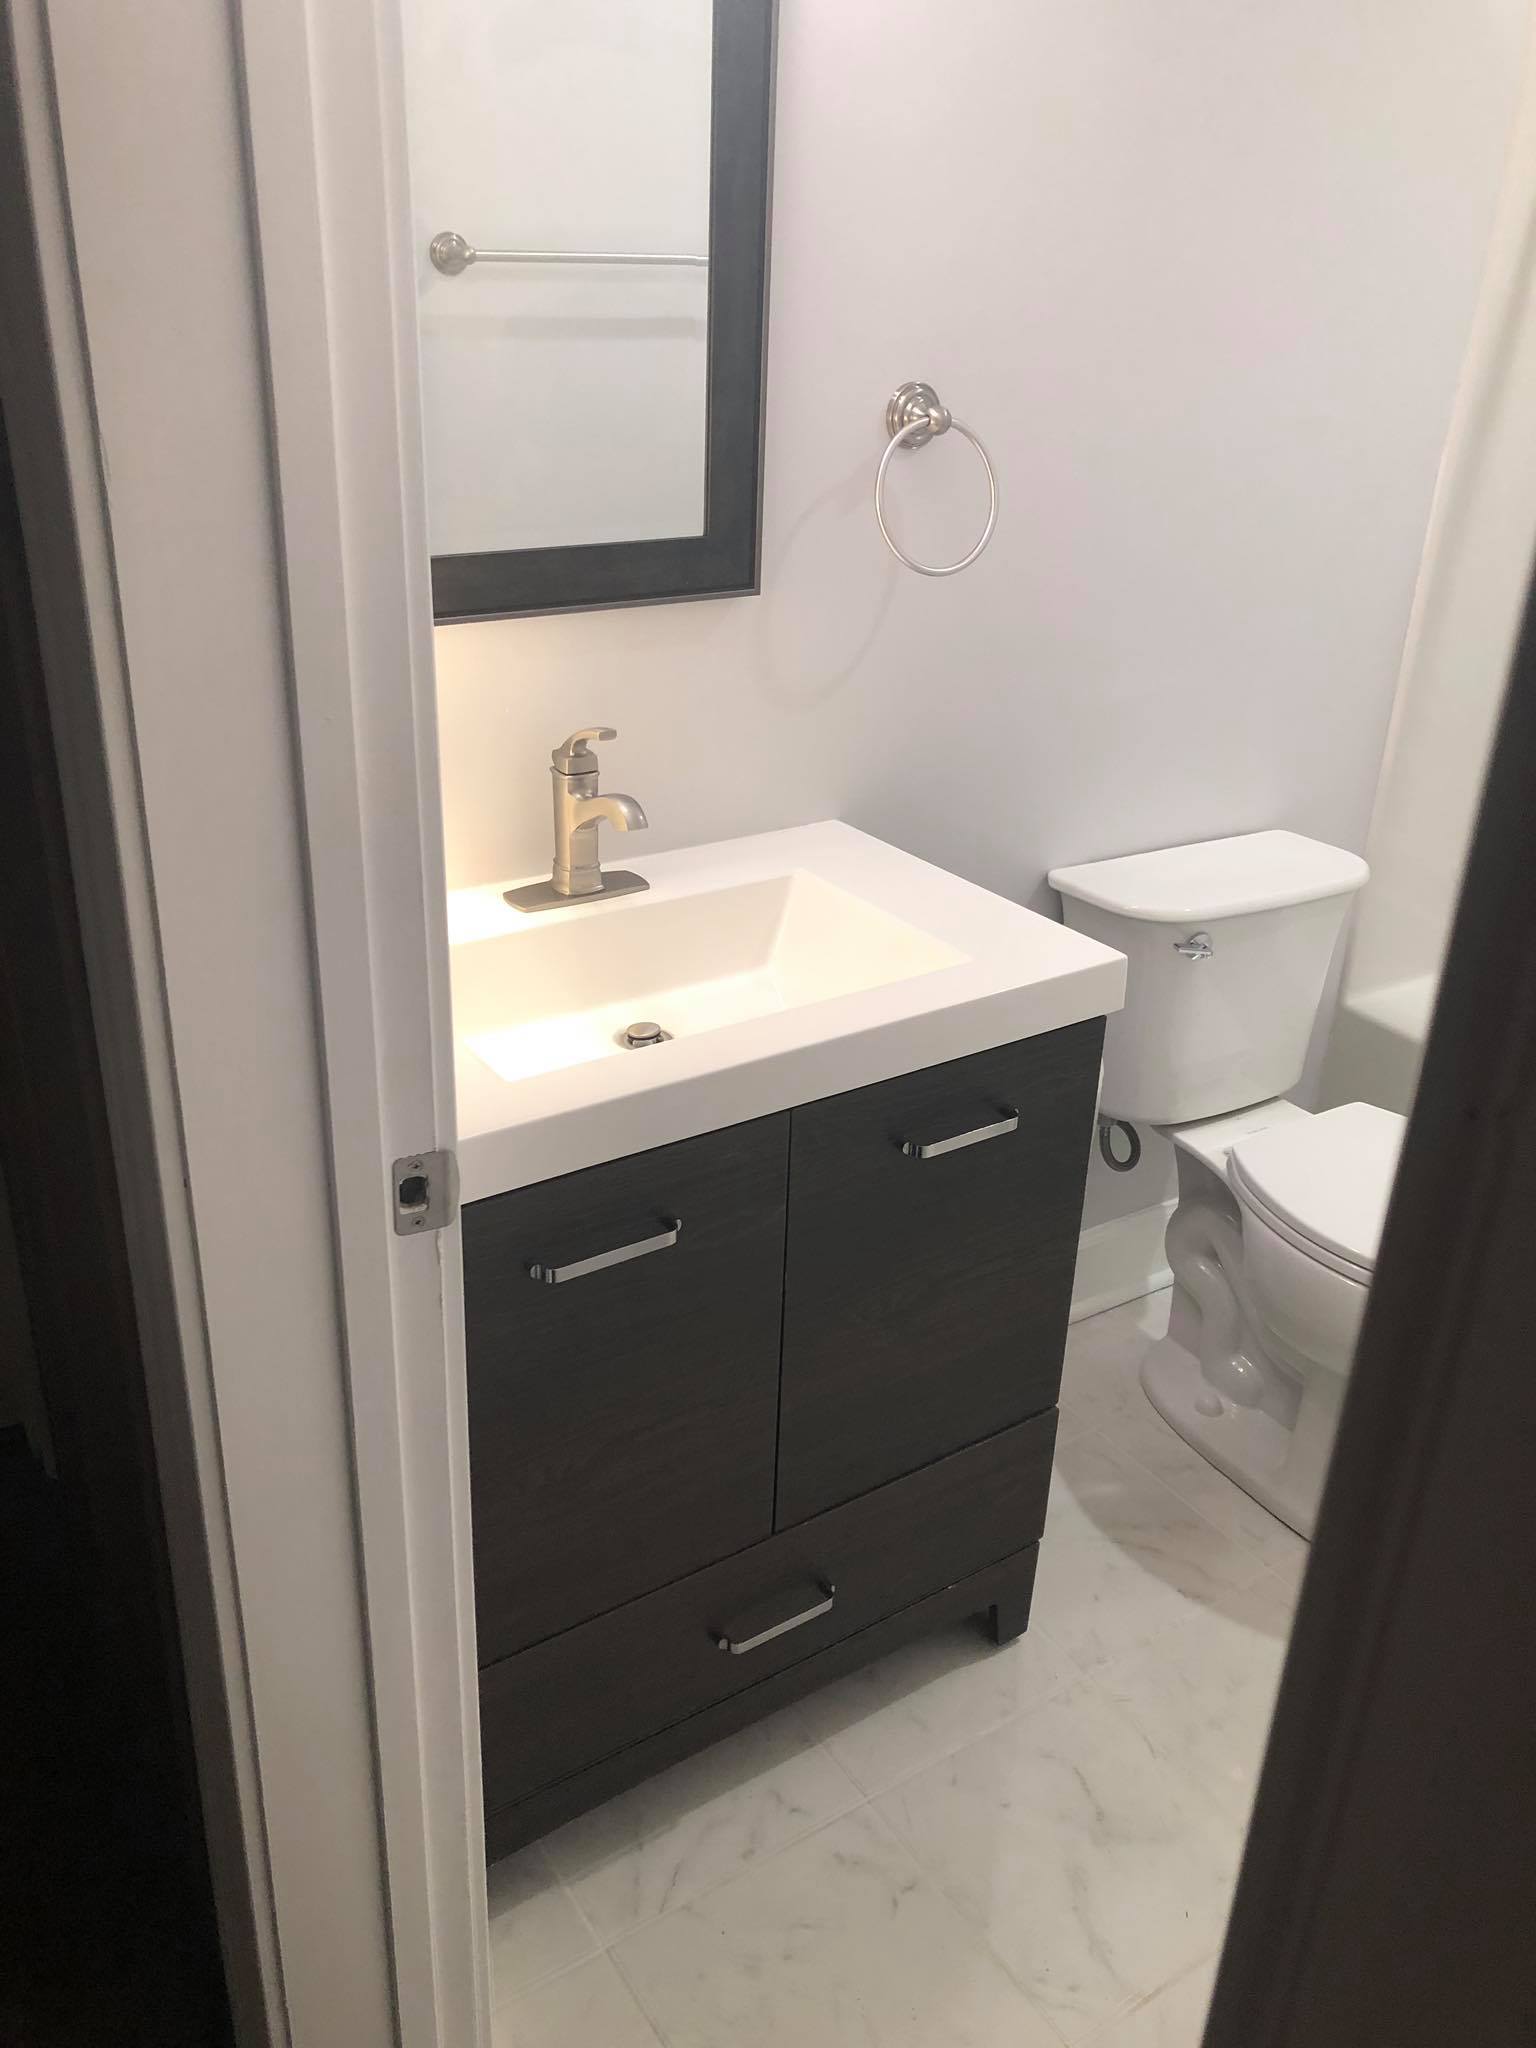 Completed Basement Bathroom Build and Installation with Vanity Tub and Shower 3